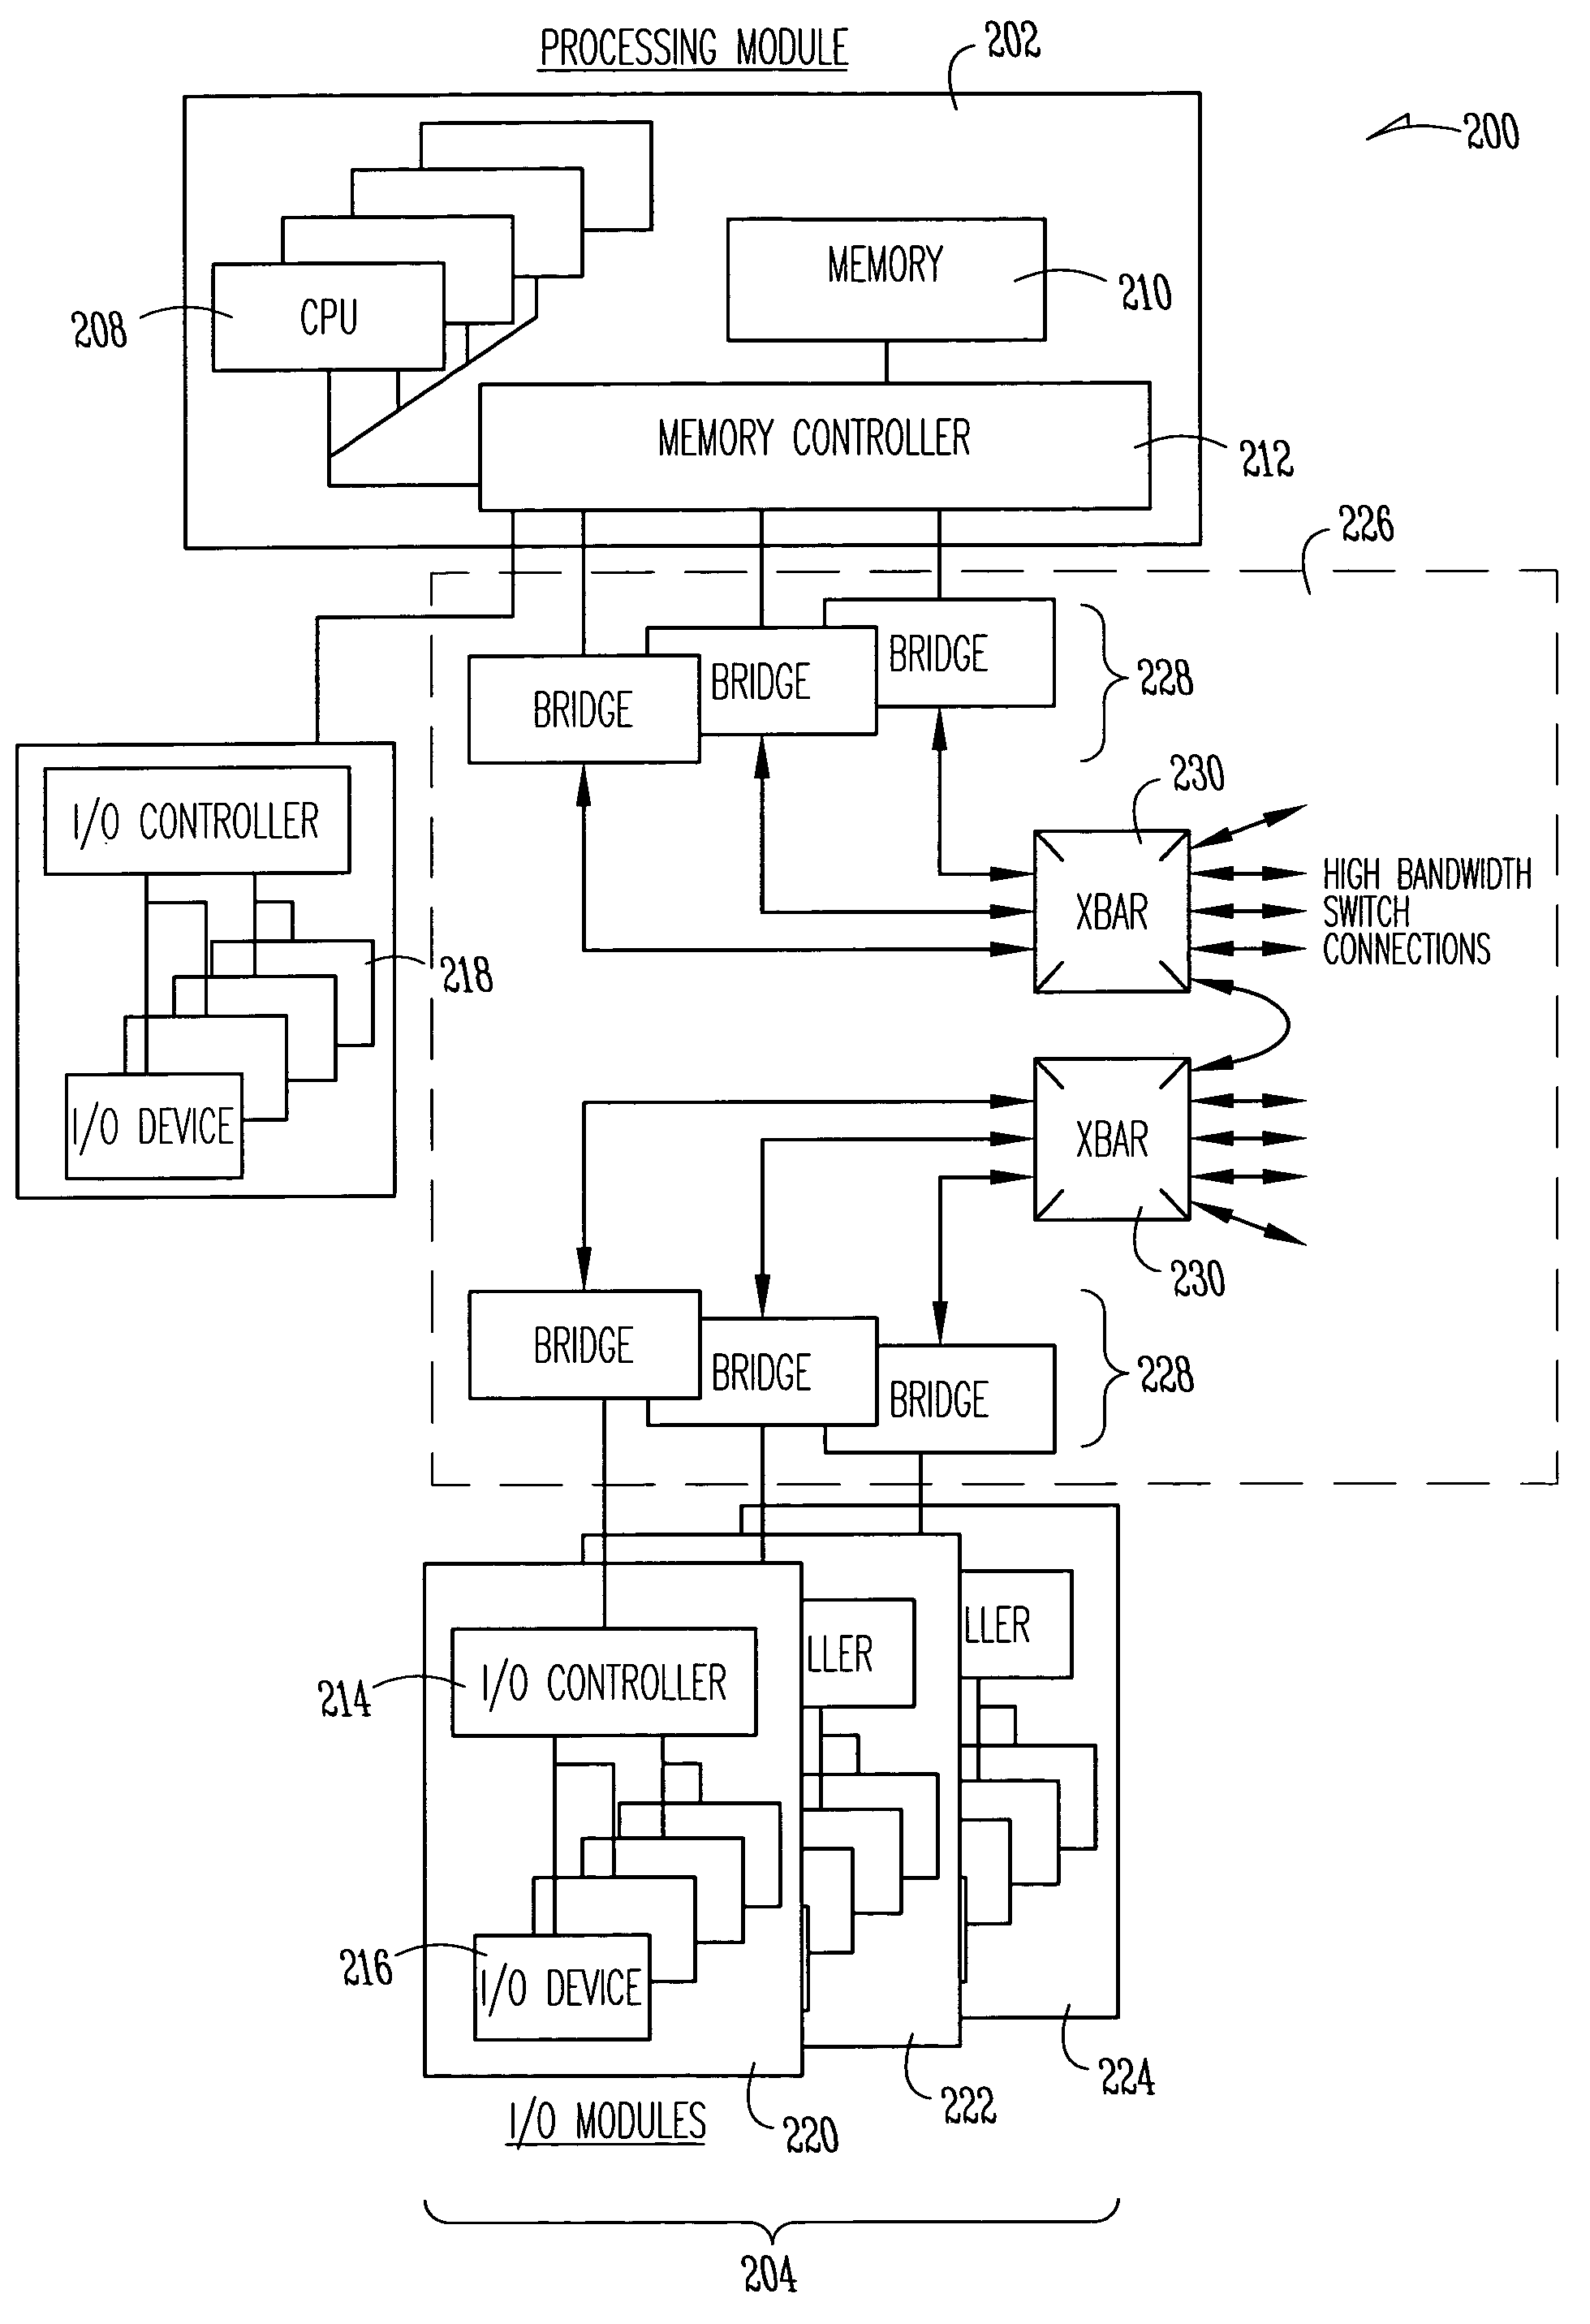 Scalable distributed memory and I/O multiprocessor system